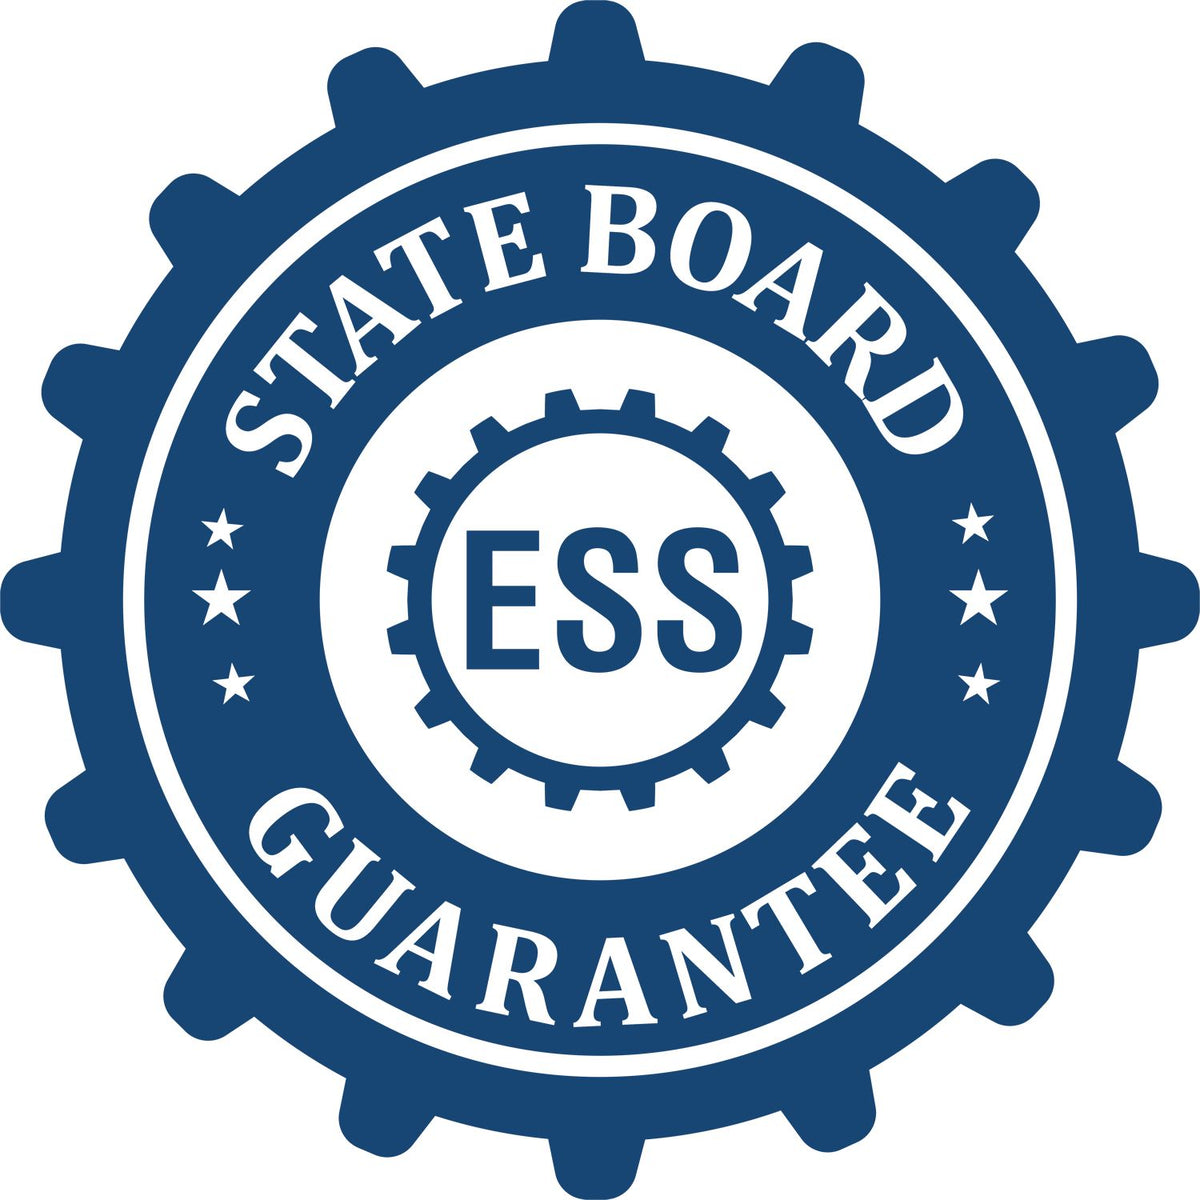 An emblem in a gear shape illustrating a state board guarantee for the New York Geologist Desk Seal